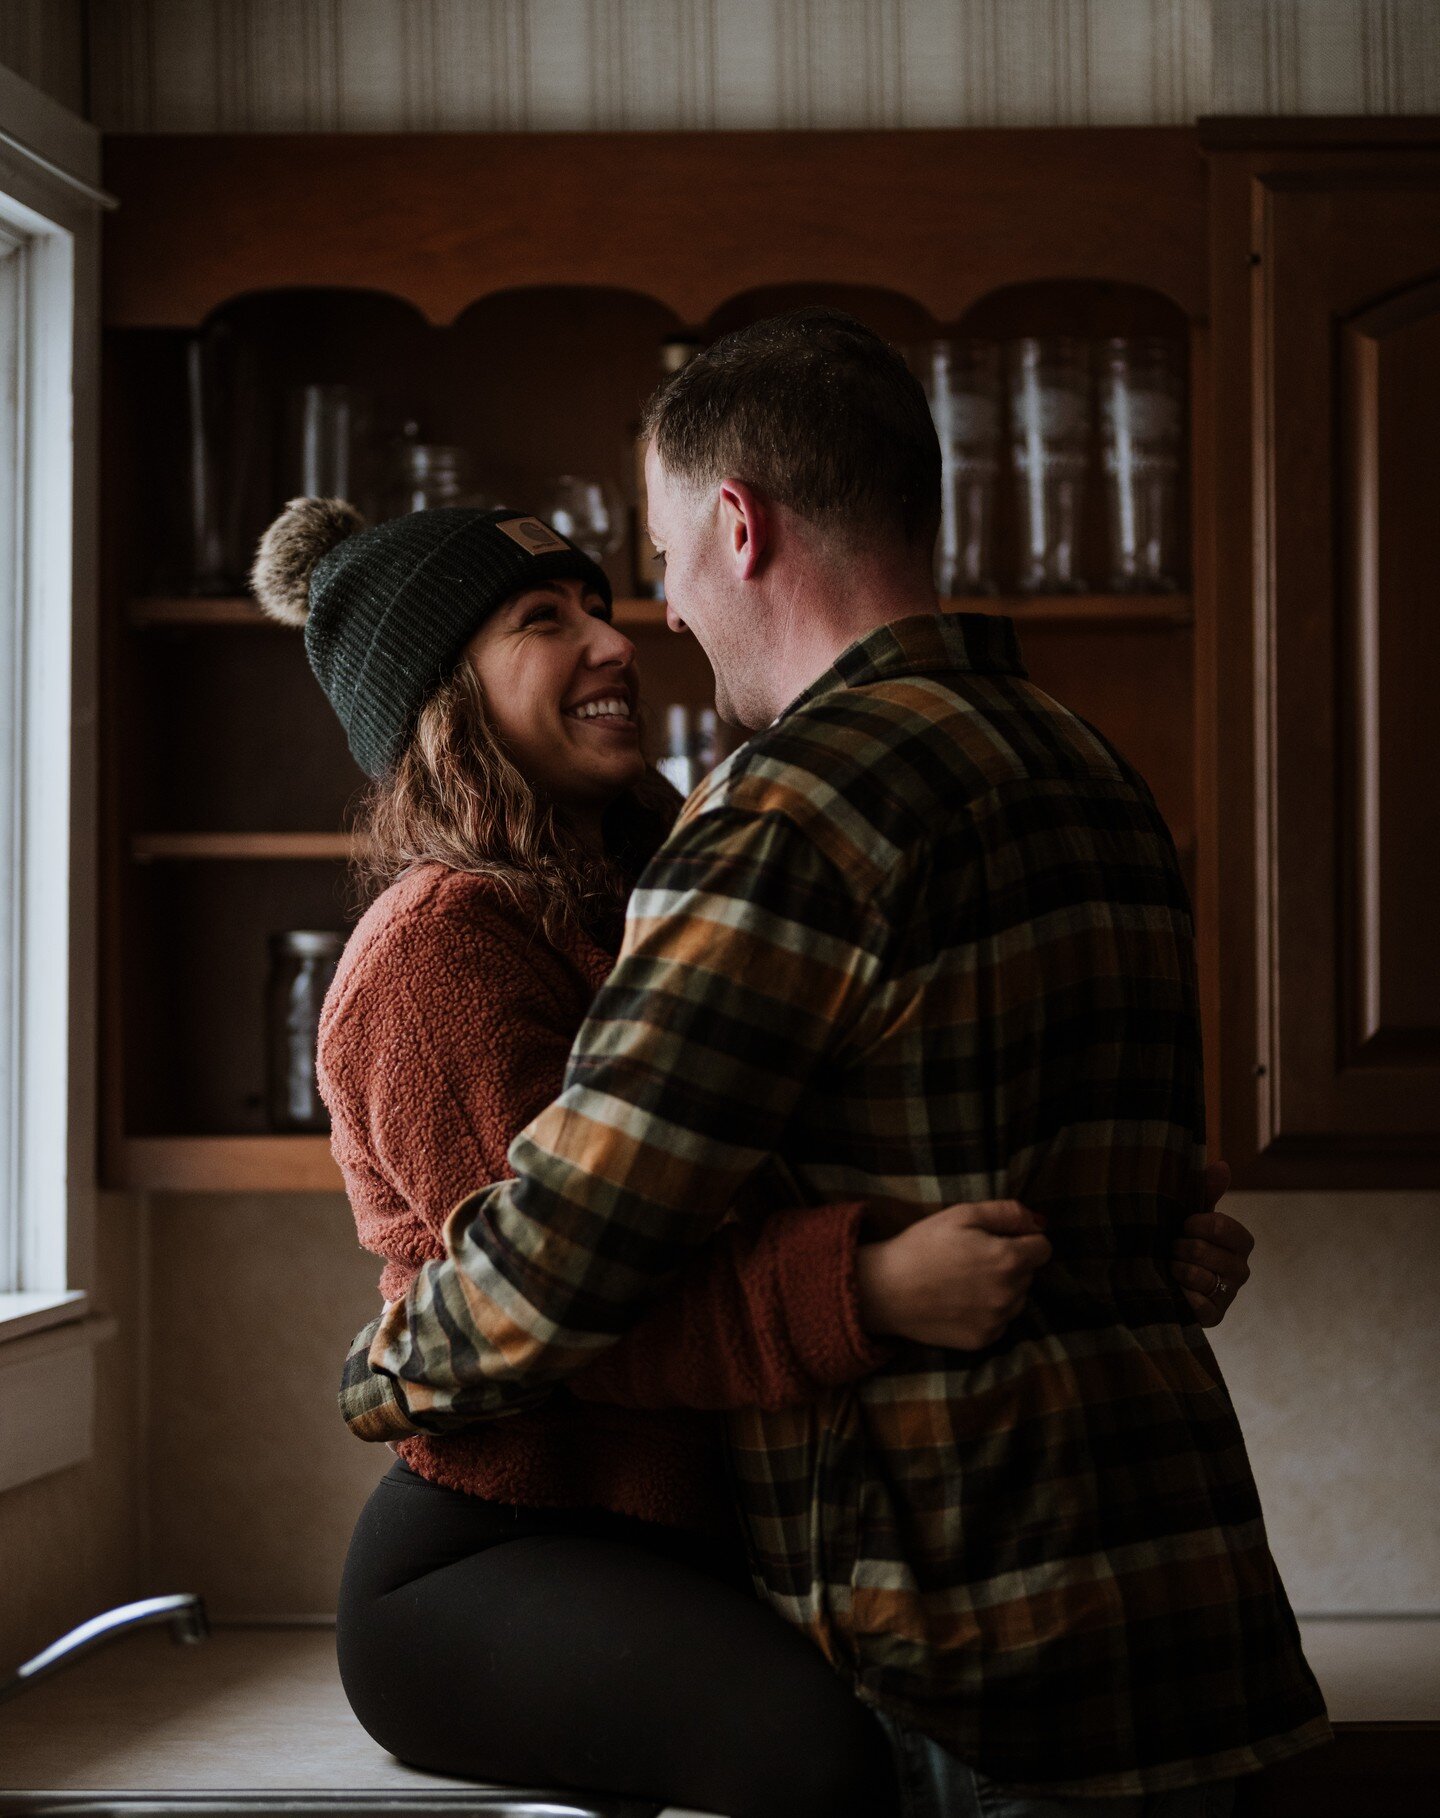 Cuddling up in the kitchen of your new home together is always a welcome idea for your session.

I'm here to help you document and chronicle your lives together in the present&mdash;across all stages of your relationship. From &quot;just because&quot